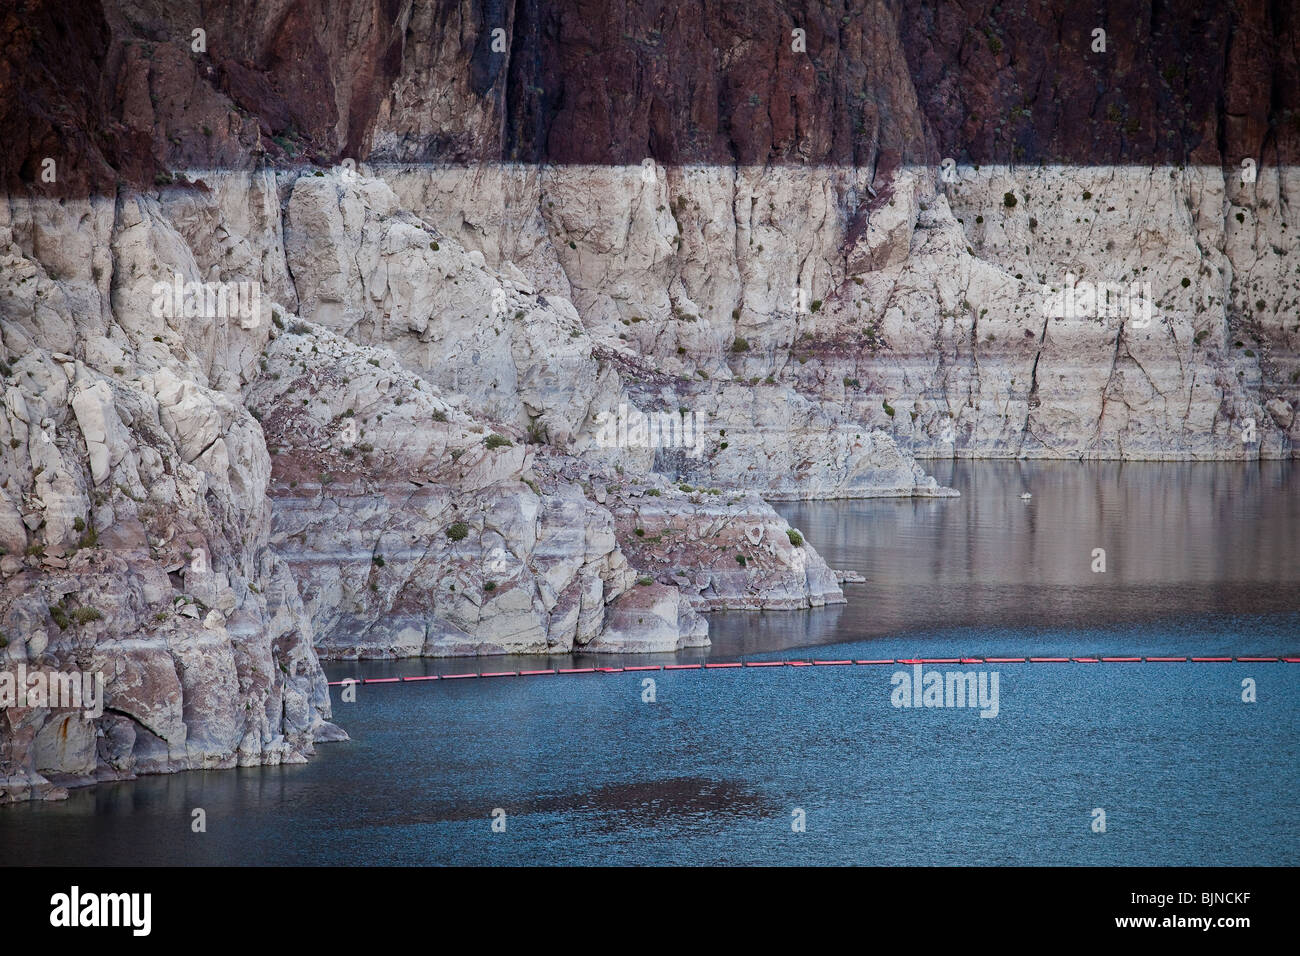 Marks along the canyon walls of Lake Mead at the Hoover Dam show the low water level due to over use of water resources Stock Photo